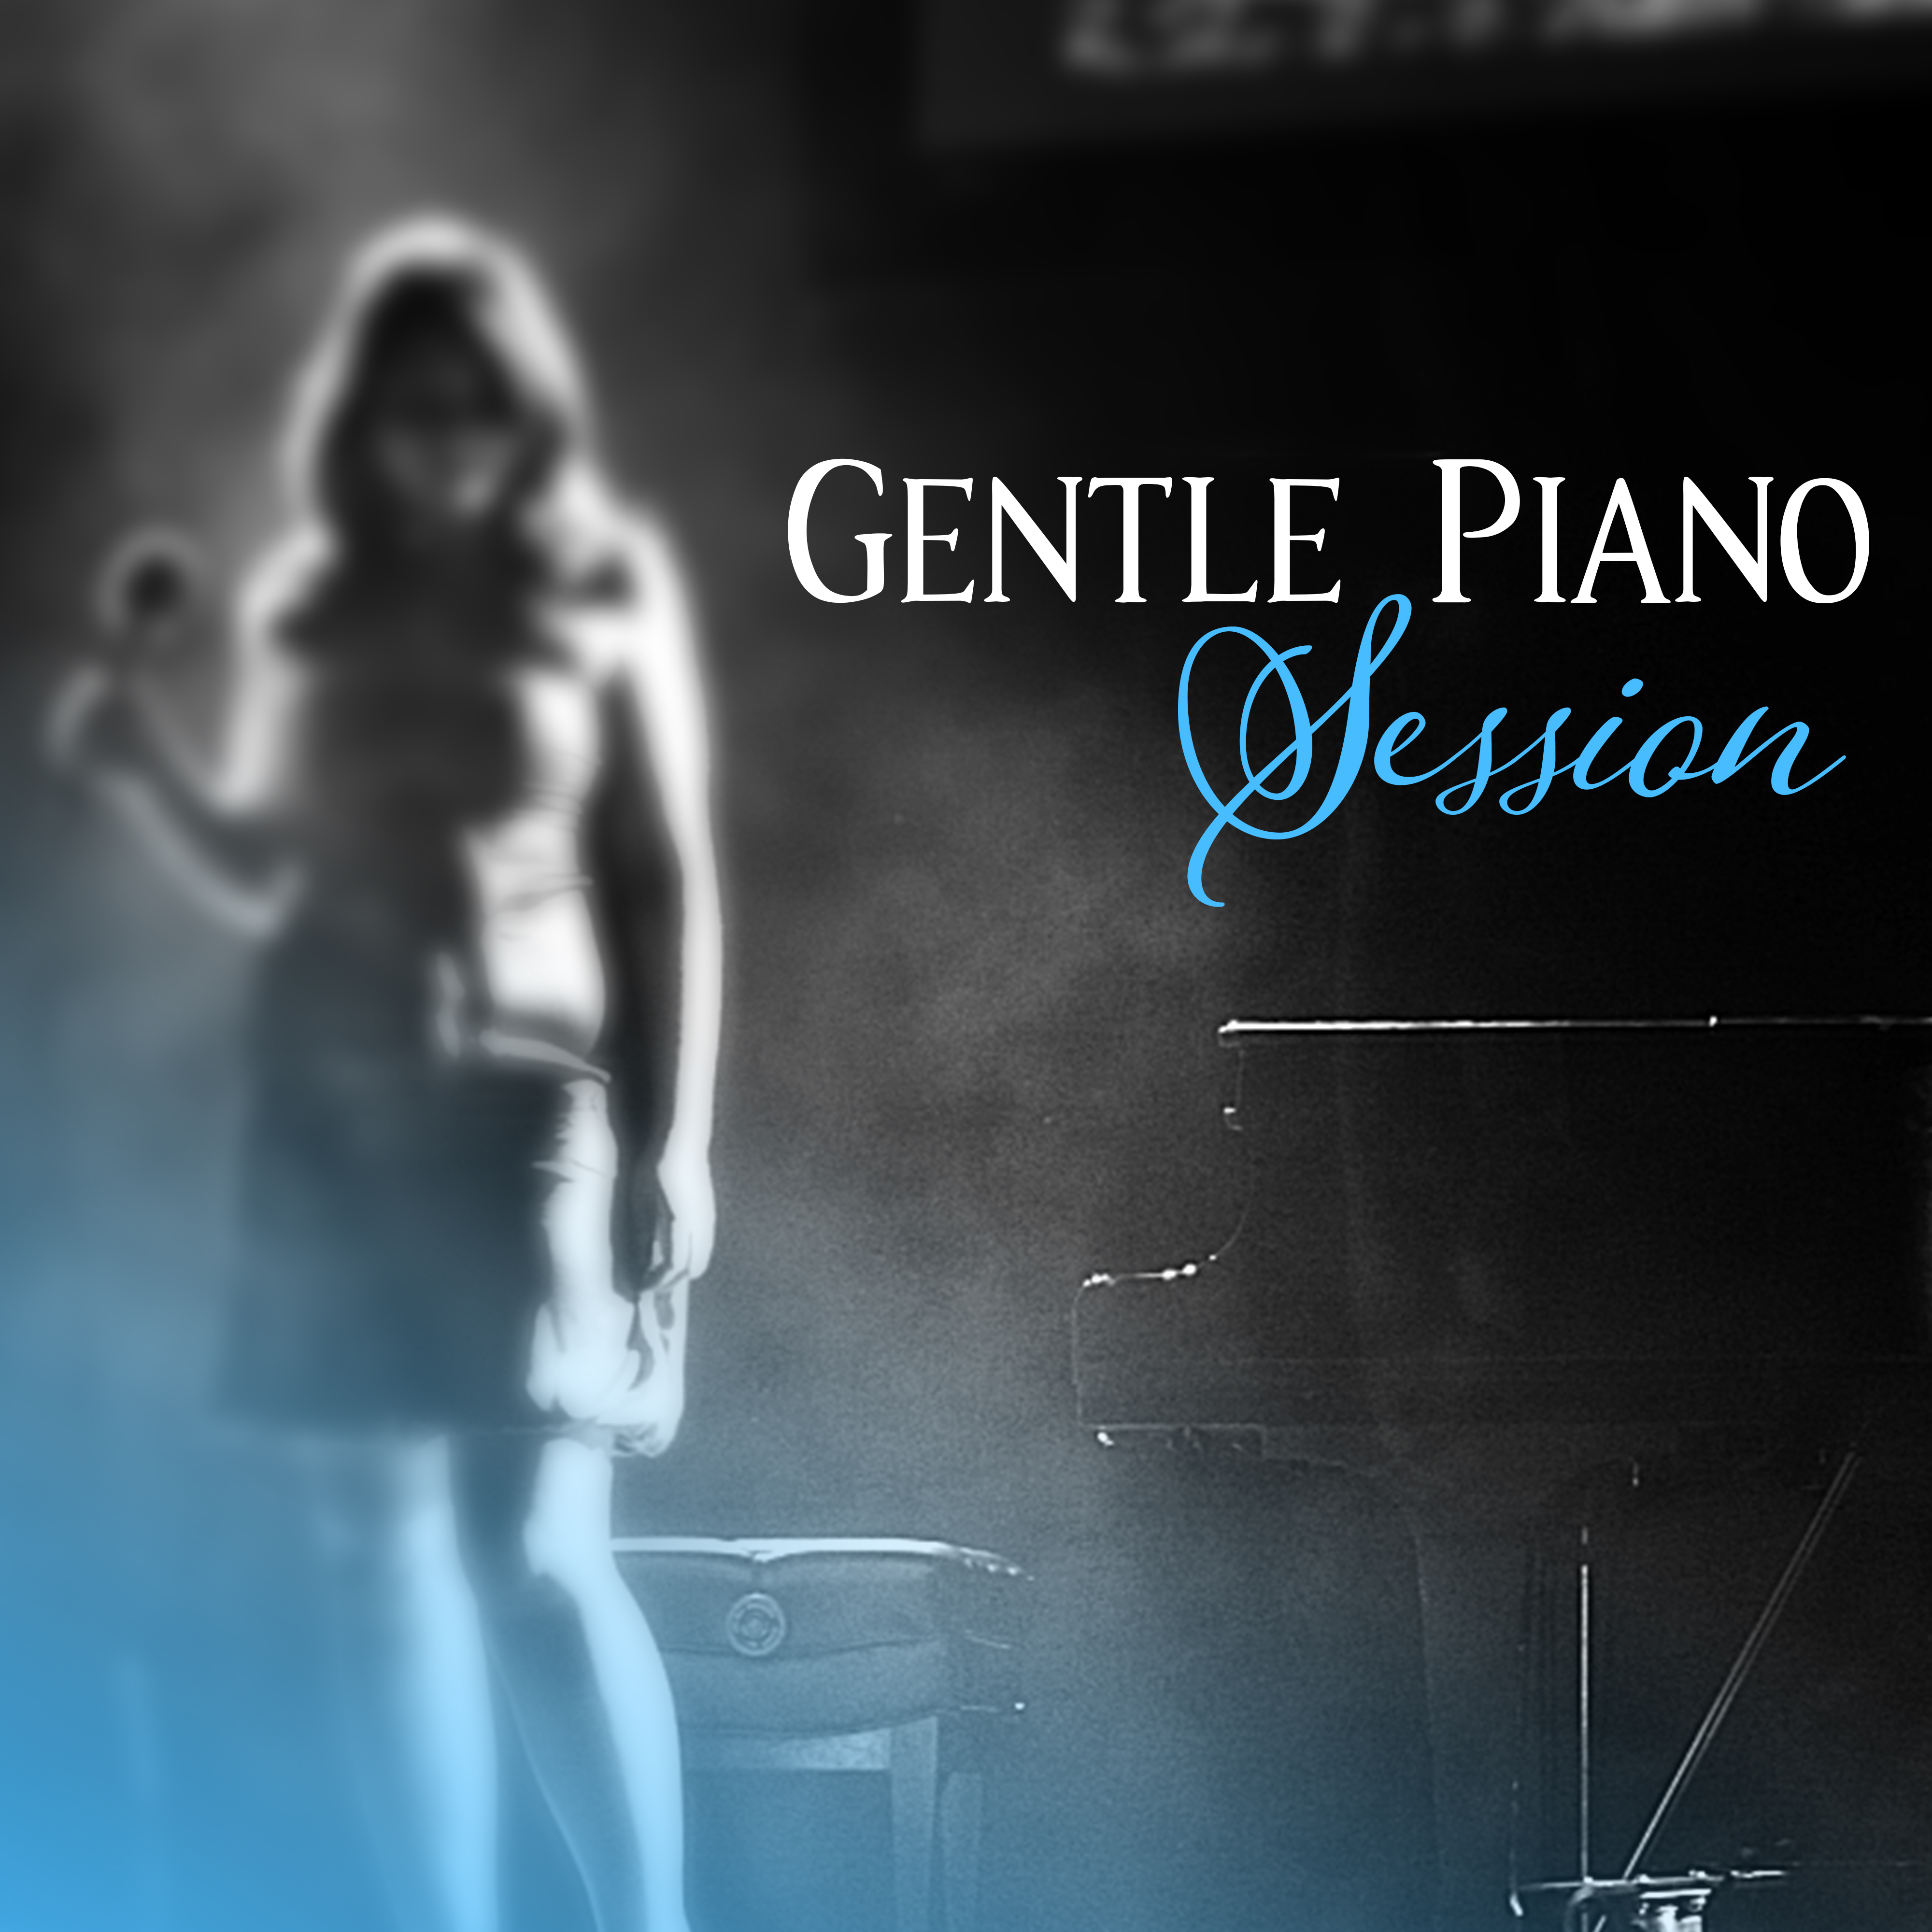 Gentle Piano Session – Jazz 2017, Instrumental Music, Ambient Piano, Relaxed Vibrations